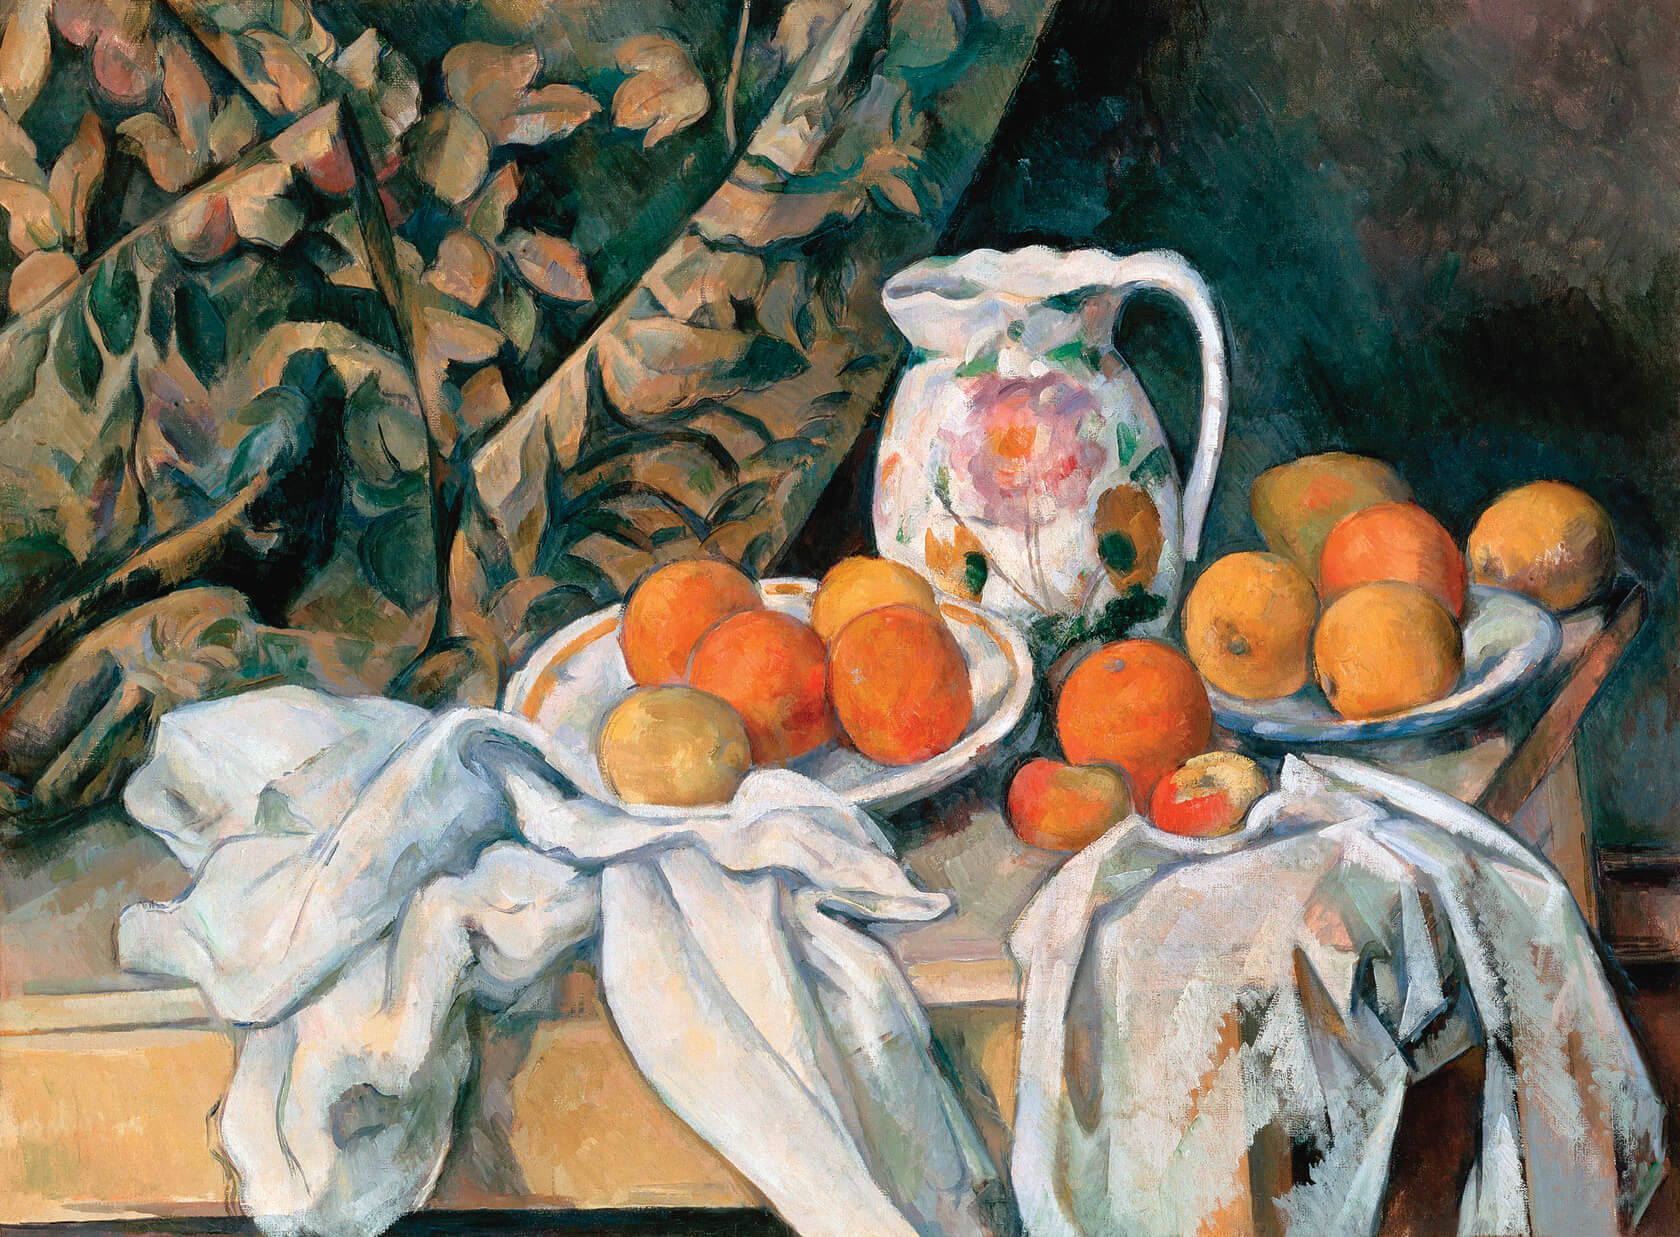 A painting of oranges on a desk from the Catherine the Great collection